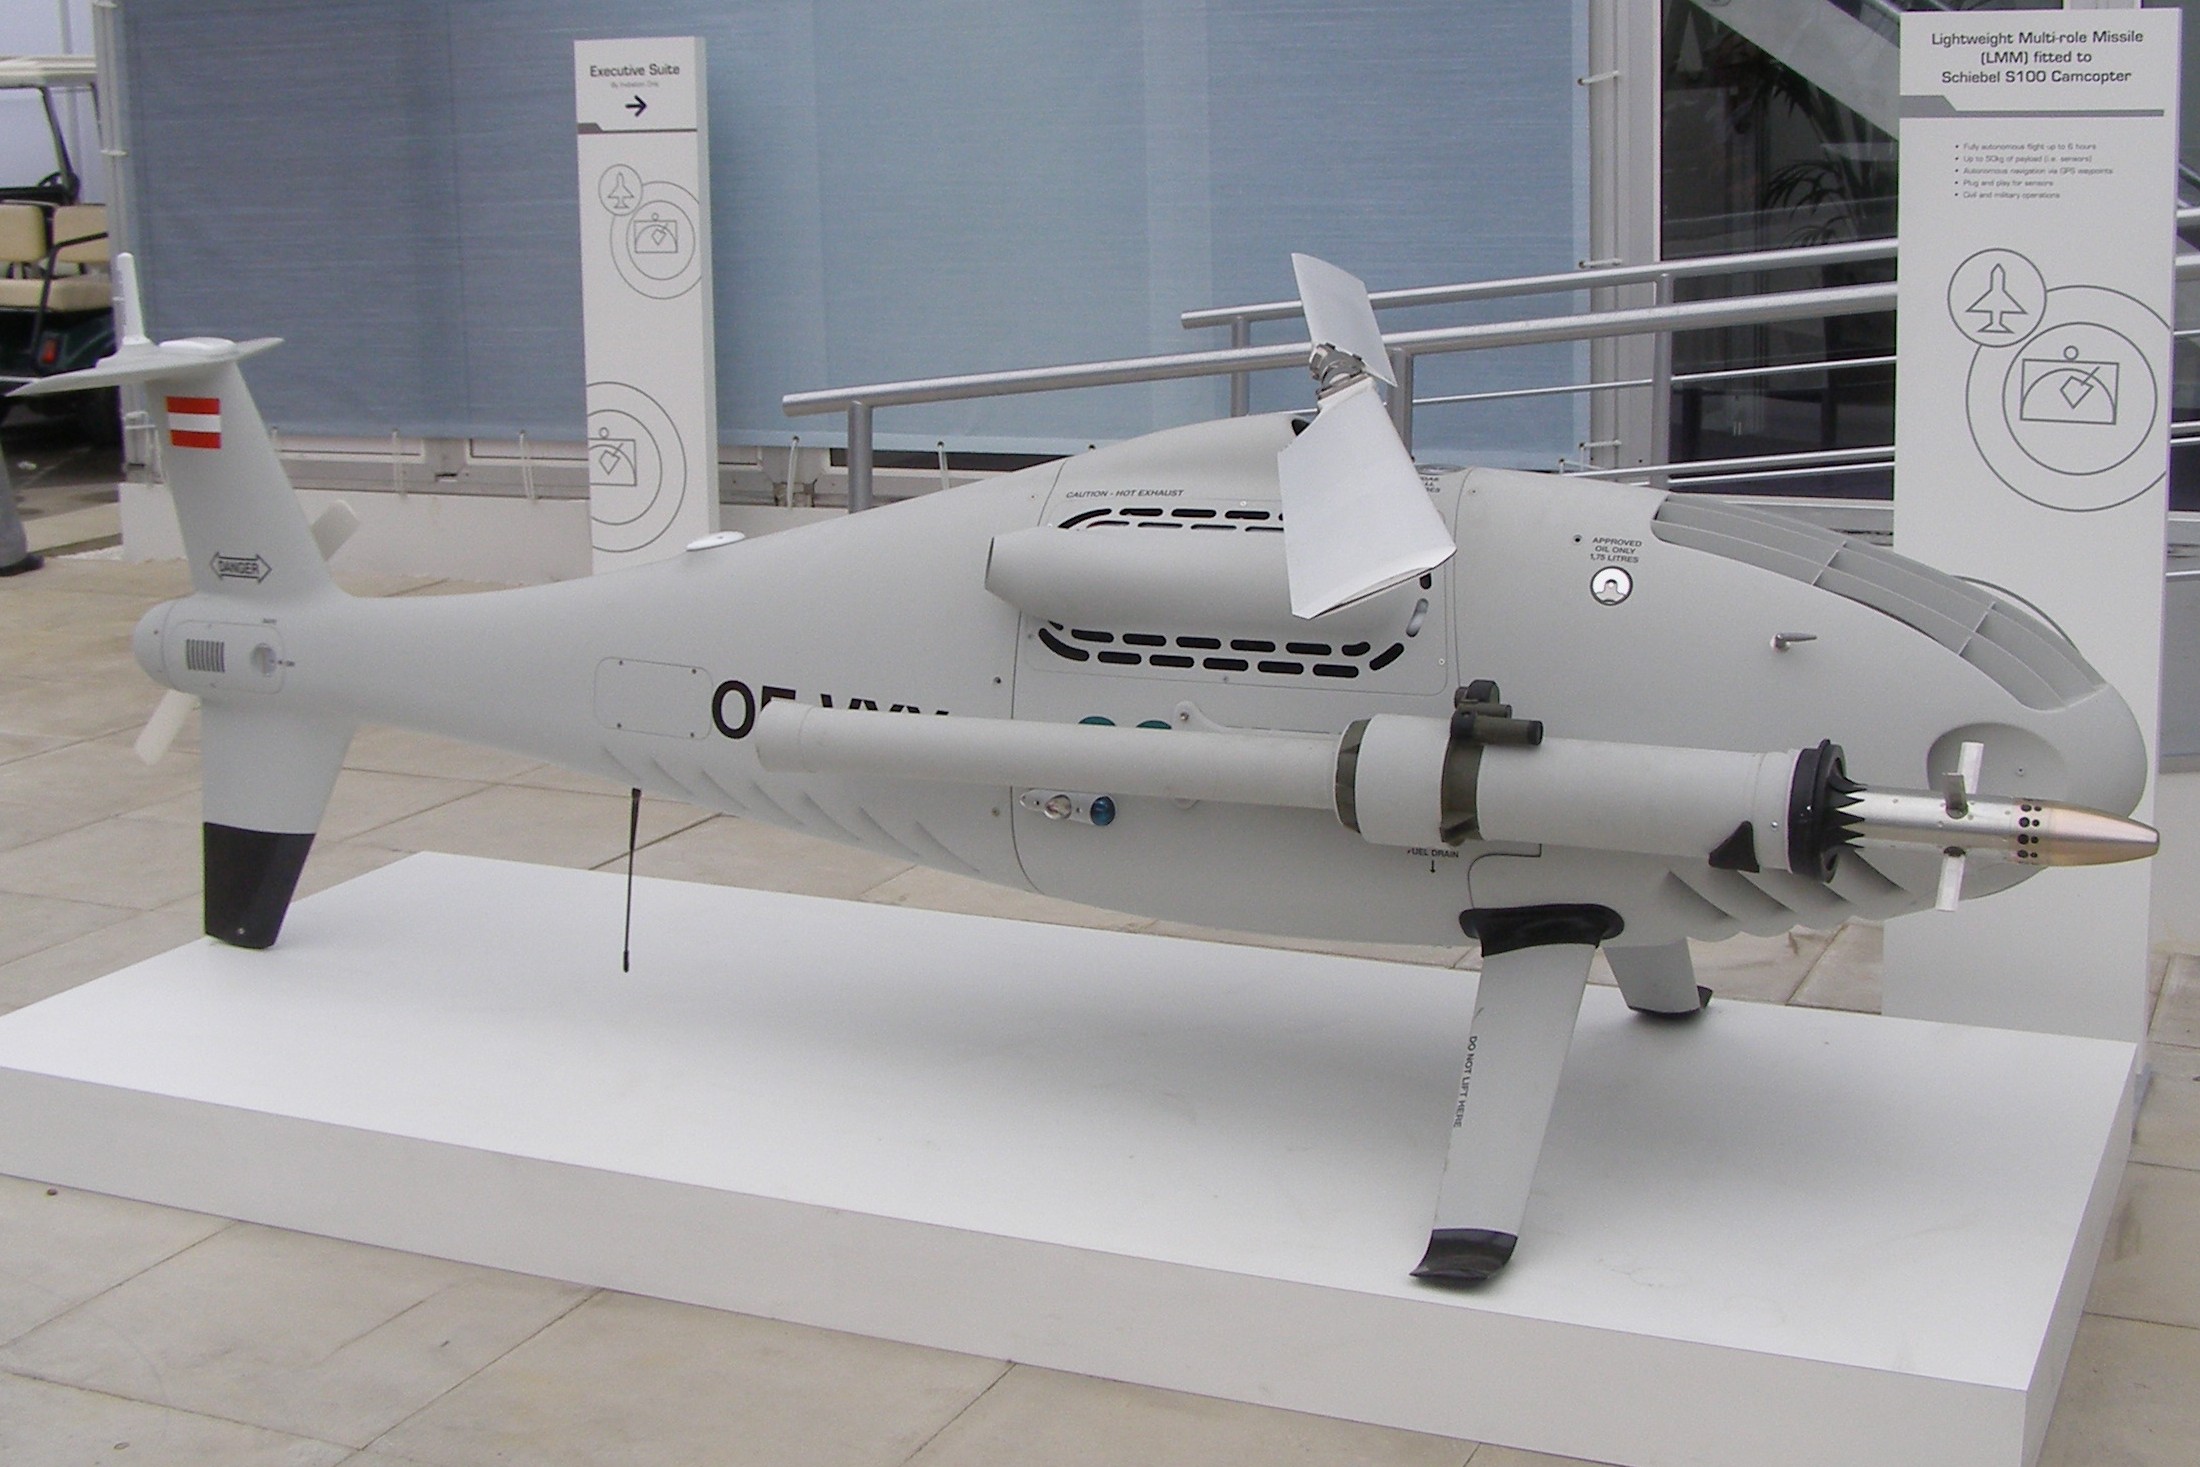 A Schiebel CAMCOPTER S-100 fitted with a Lightweight Multirole Missile By MilborneOne - Own work, CC BY-SA 3.0, https://commons.wikimedia.org/w/index.php?curid=4390358